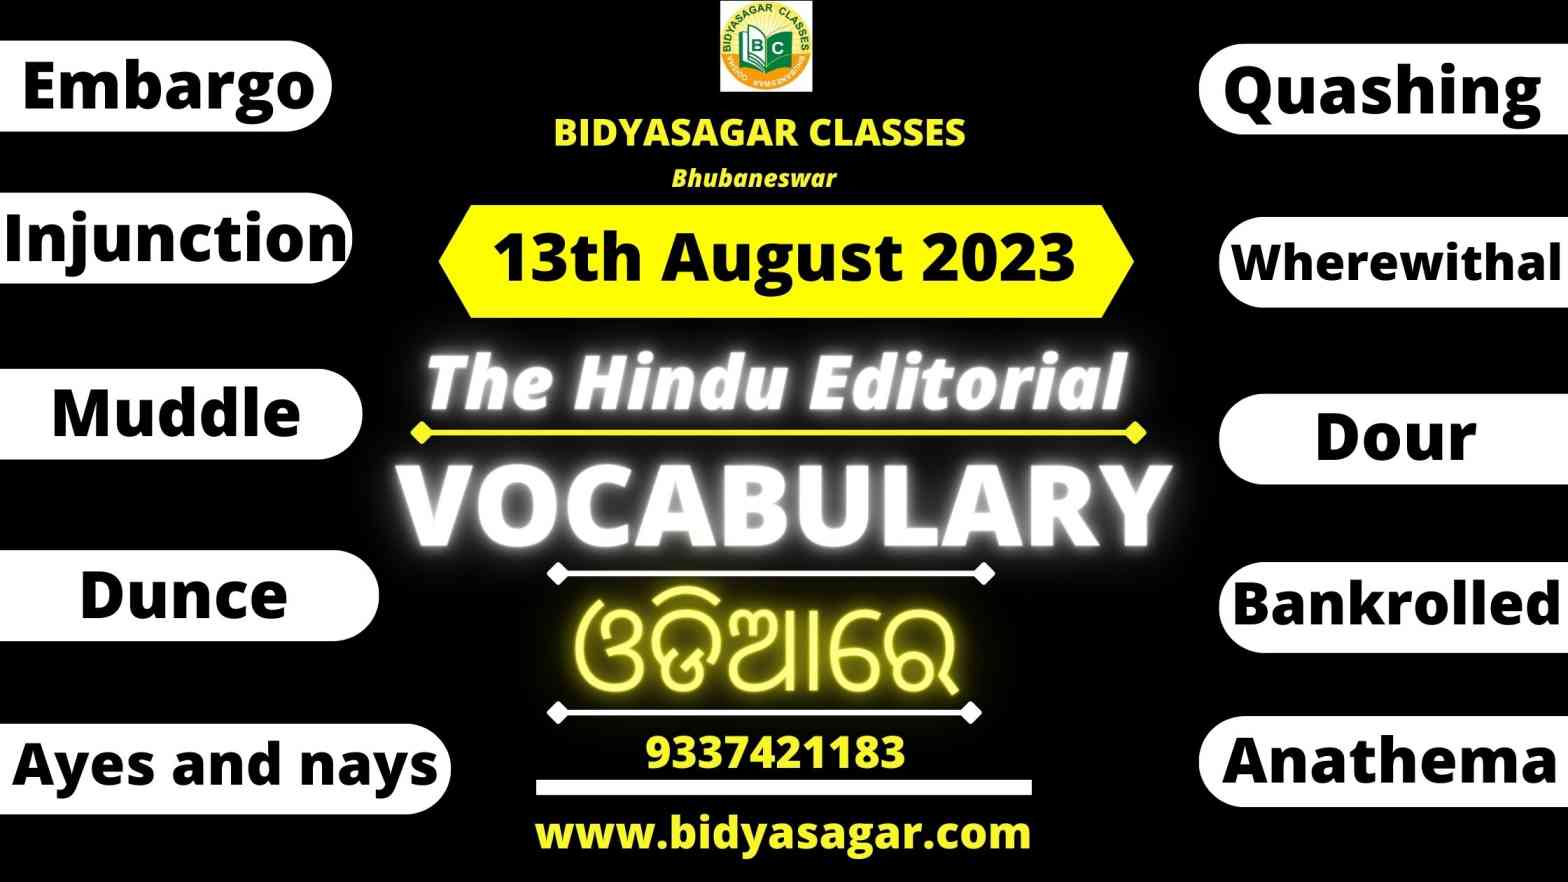 The Hindu Editorial Vocabulary of 13th August 2023